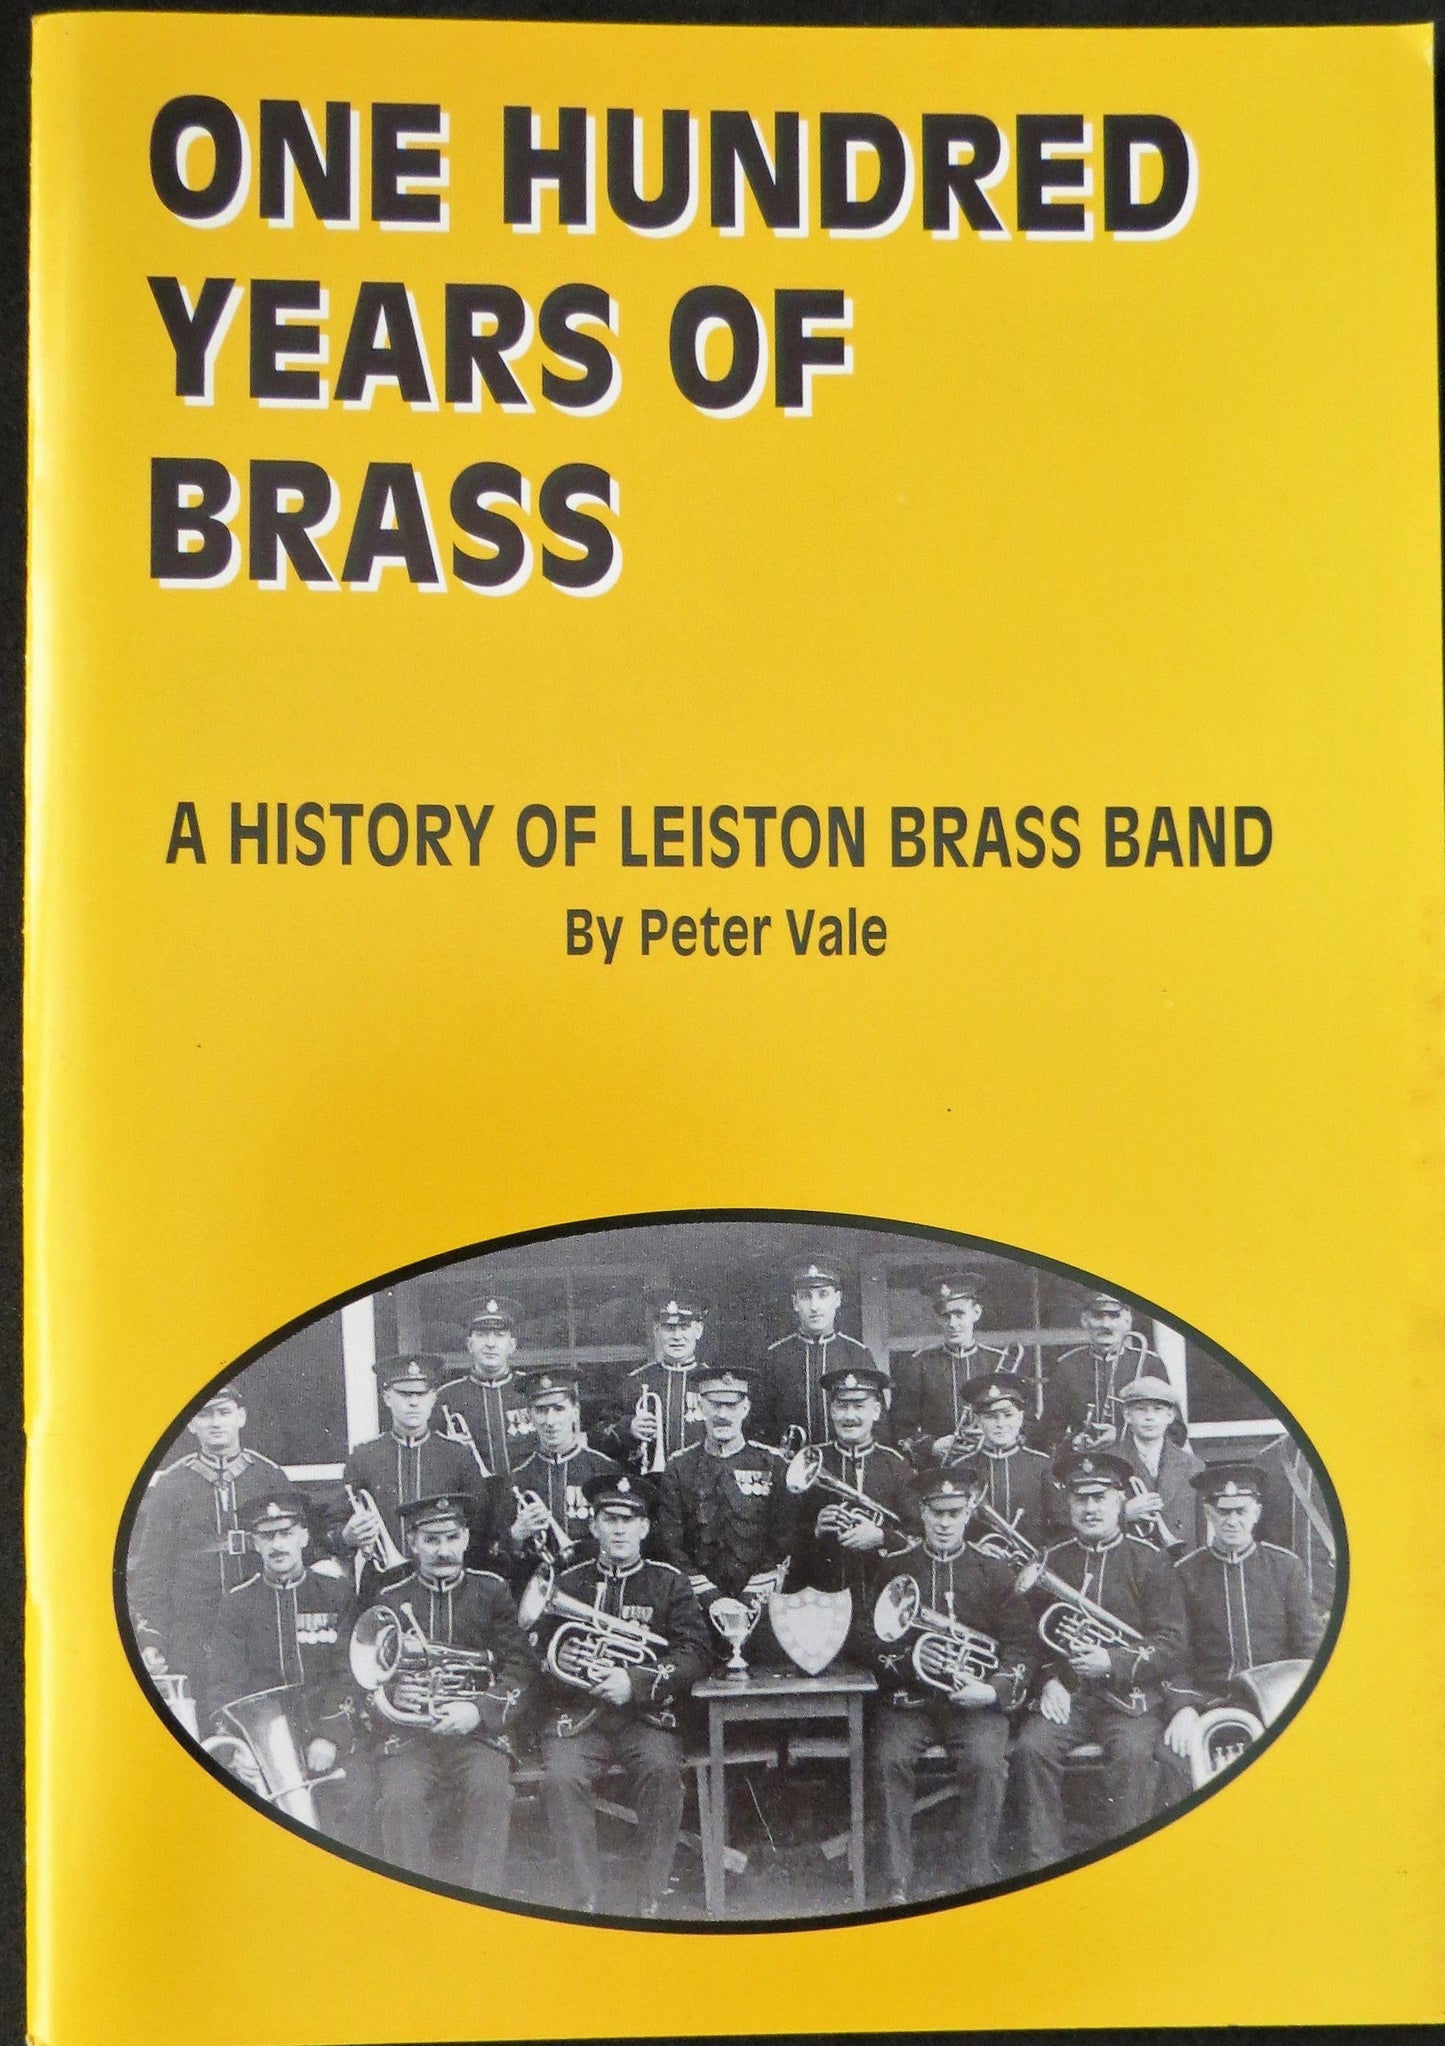 One Hundred Years of Brass